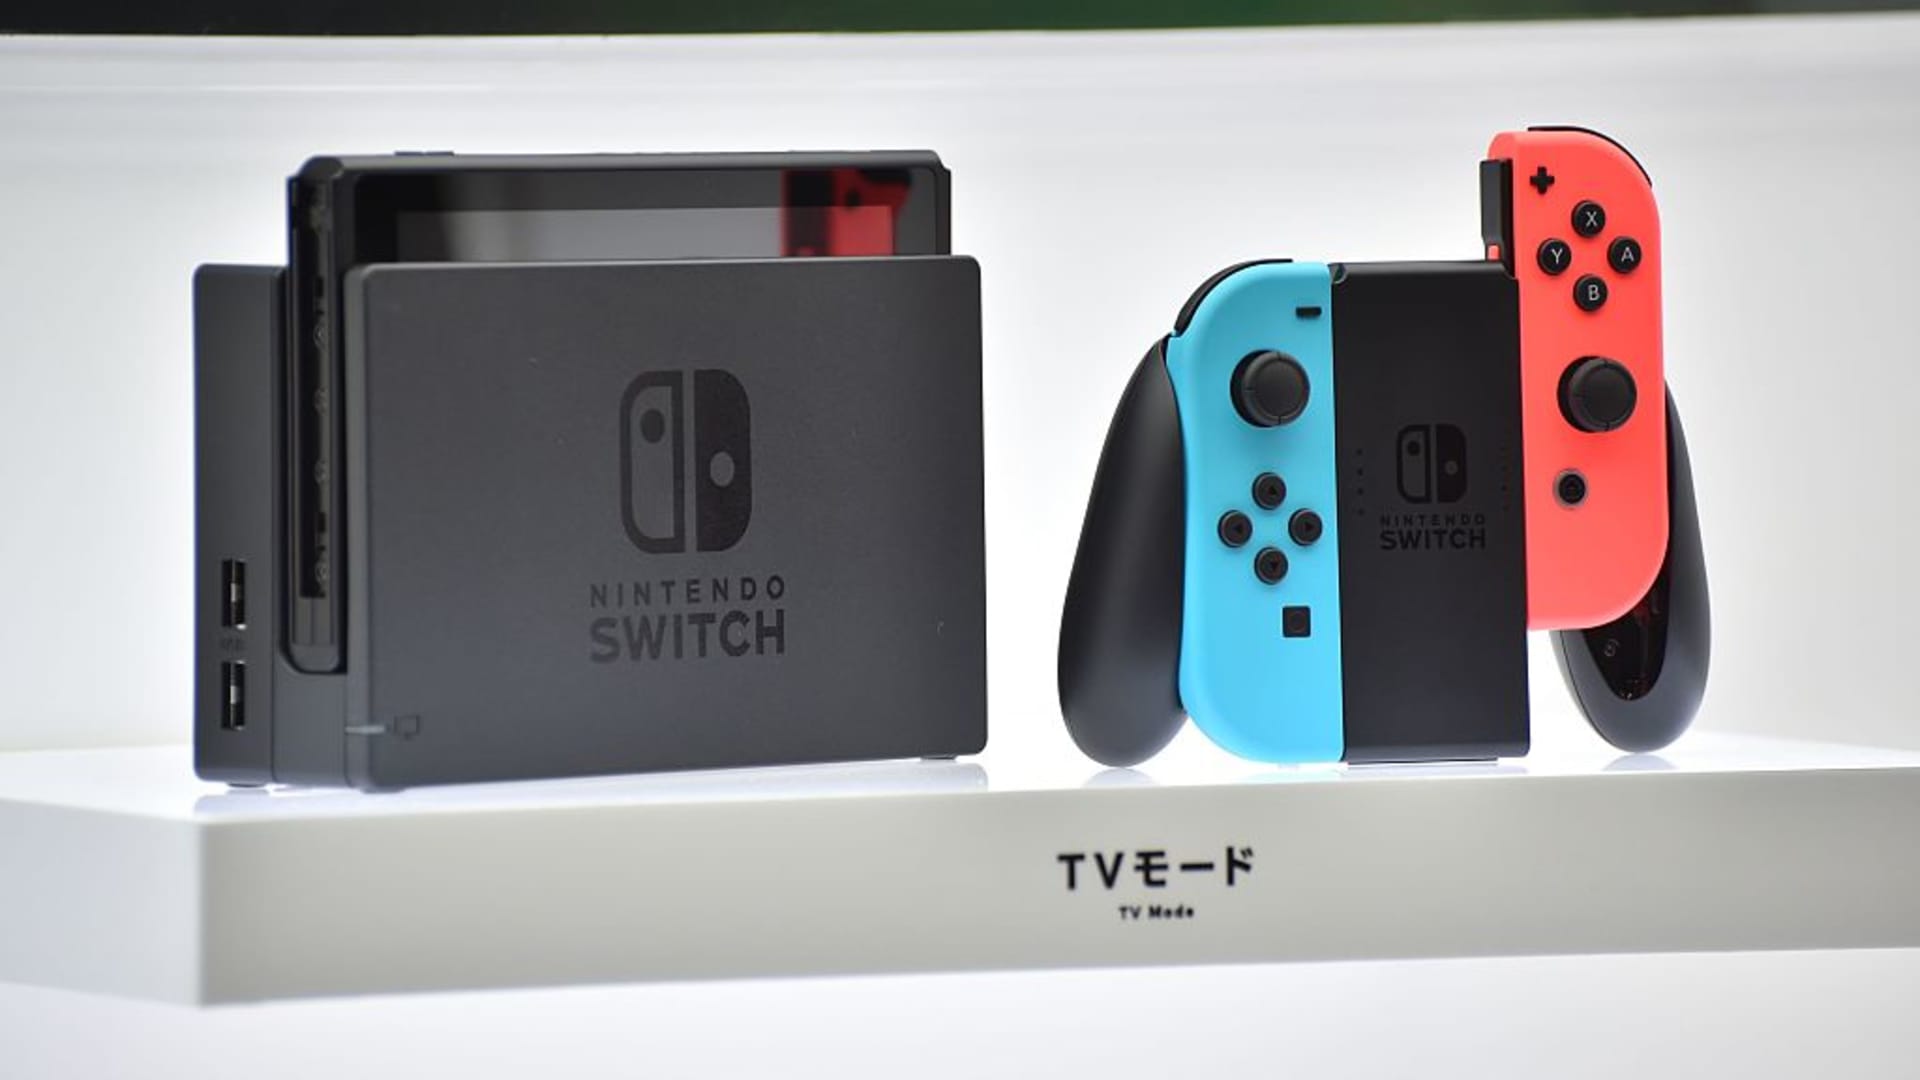 Nintendo Switch 2 price just tipped — and it could be a game changer